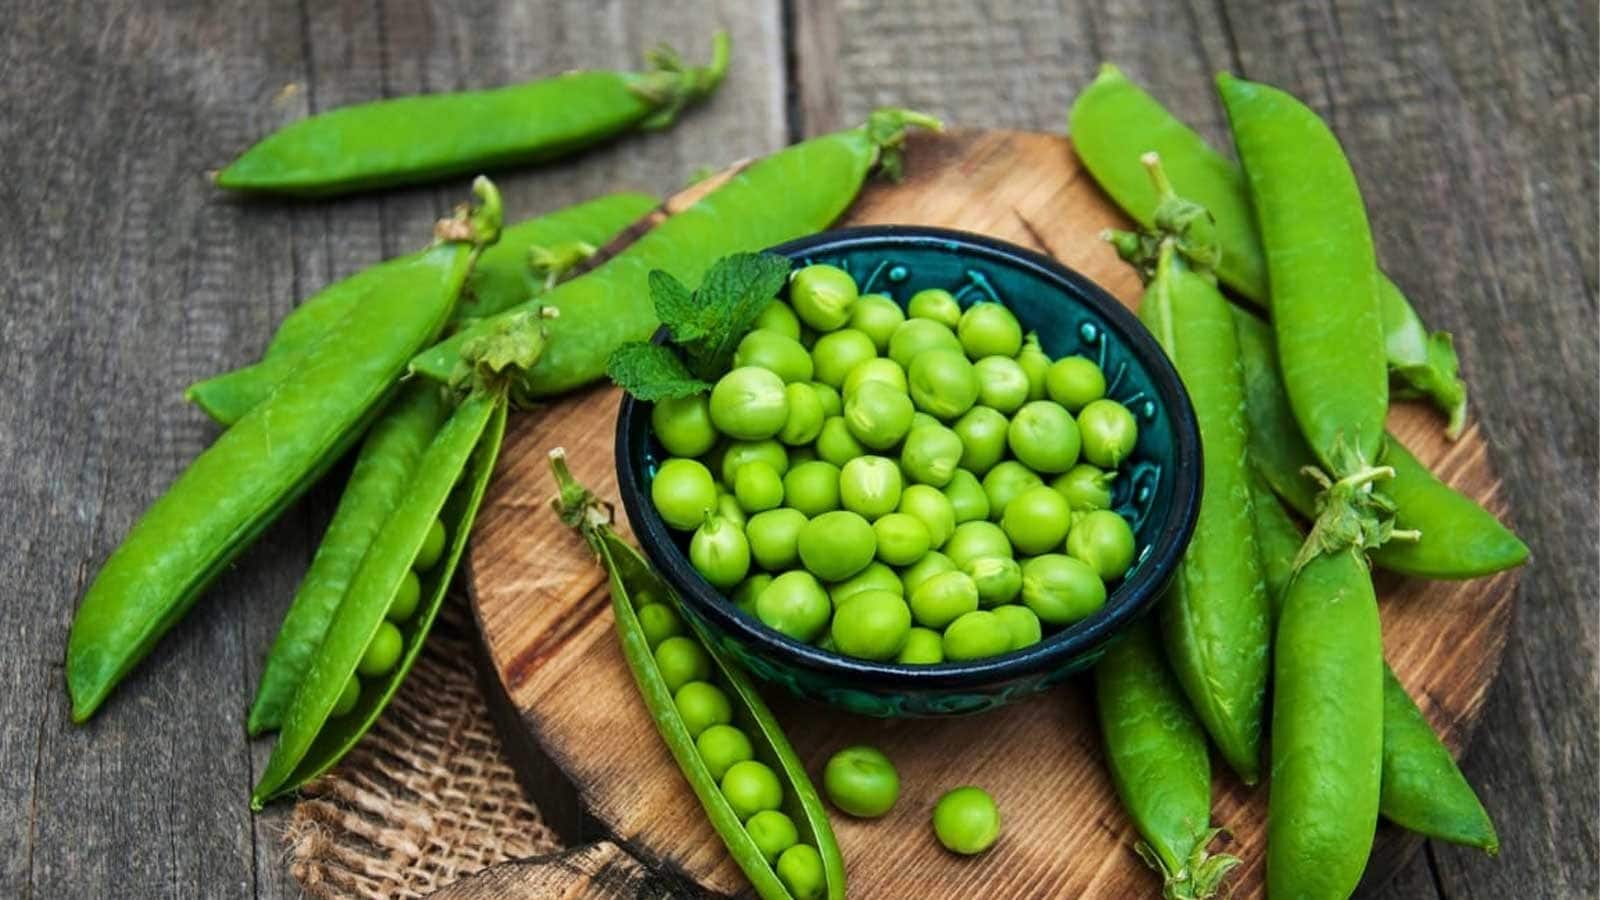 Whatâ€™s the Difference Between Snow and Sugar Snap Peas?